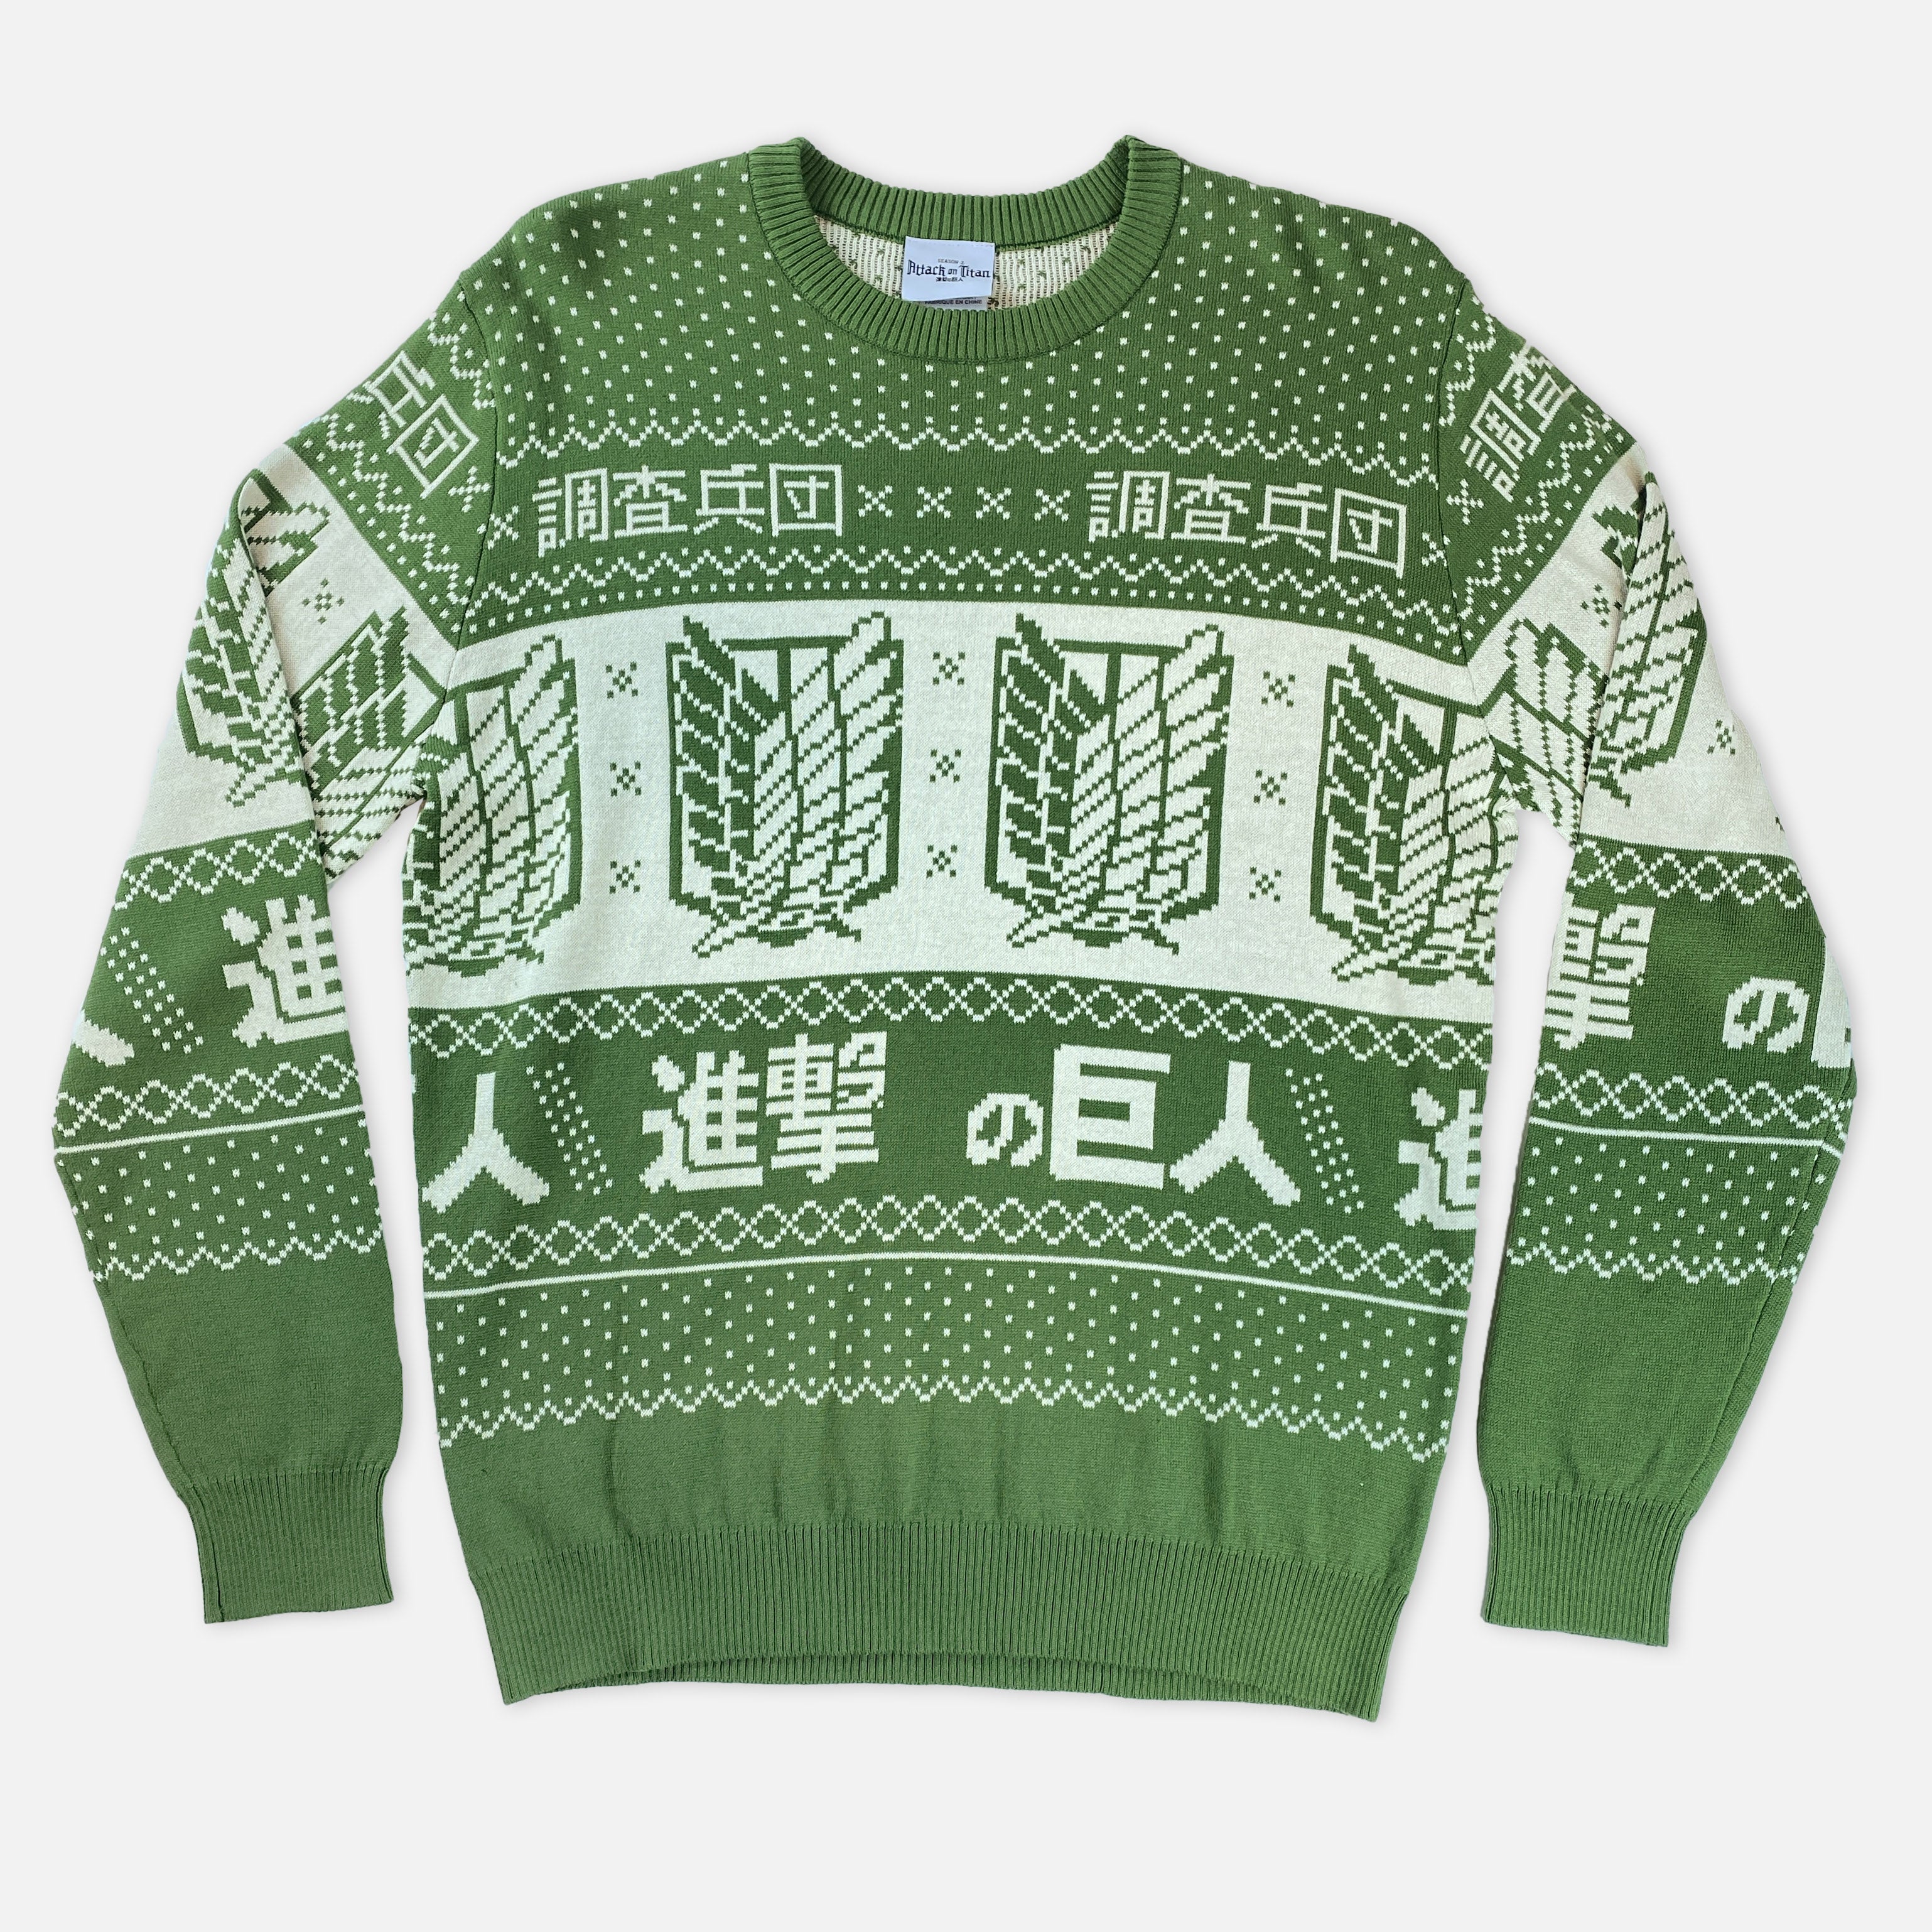 Attack on Titan - Scout Regiment Holiday Sweater - Crunchyroll Exclusive! image count 0